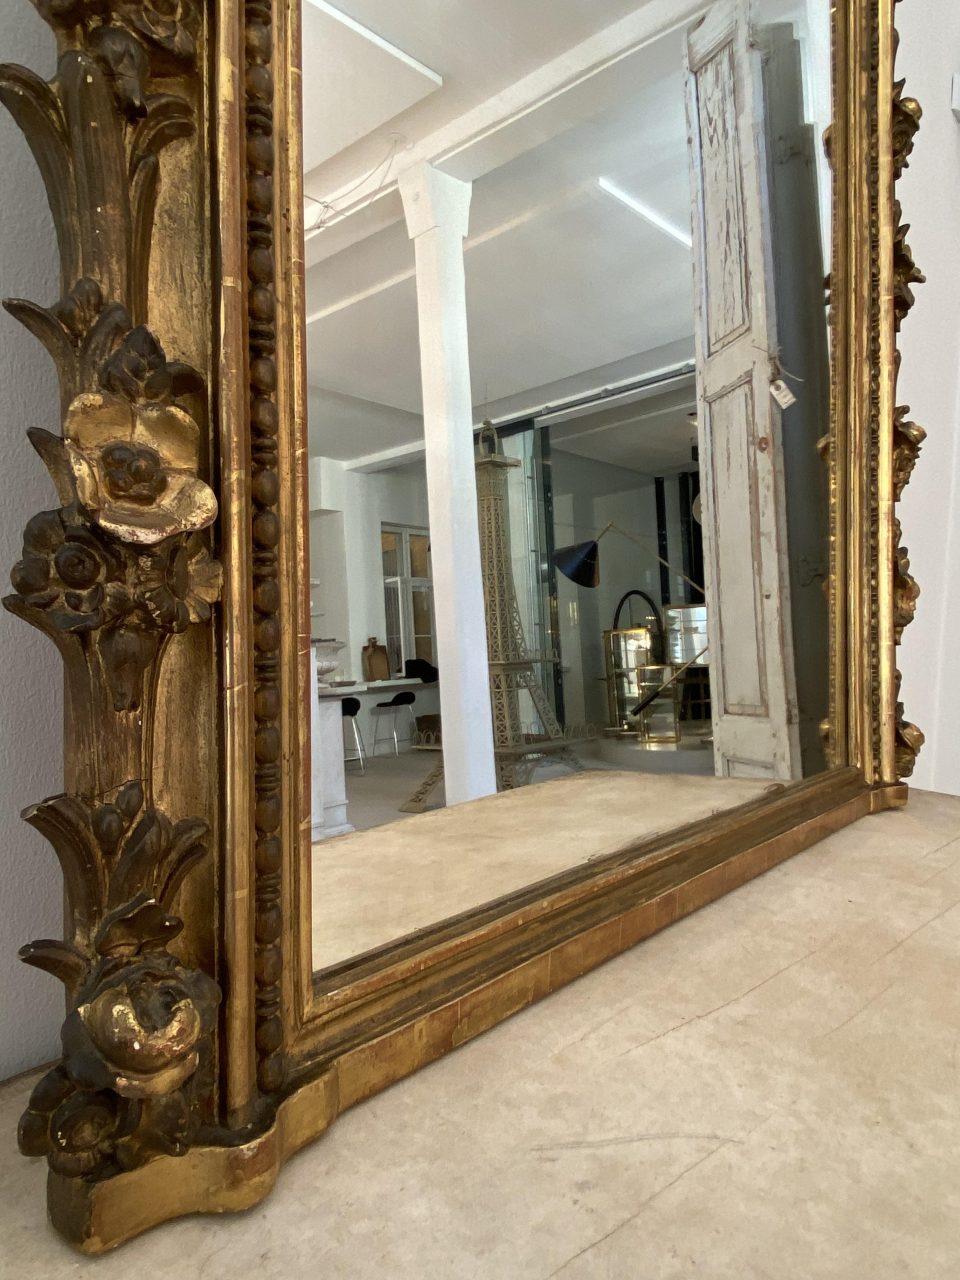 Stunning antique ornate golden mirror, circa 1870s France, typically seen hanging above a mantelpiece. Amazing details. Eye-catching. Original mercury mirror, surrounded by a beautiful and elegant wooden framed profile with rosettes and foliage and